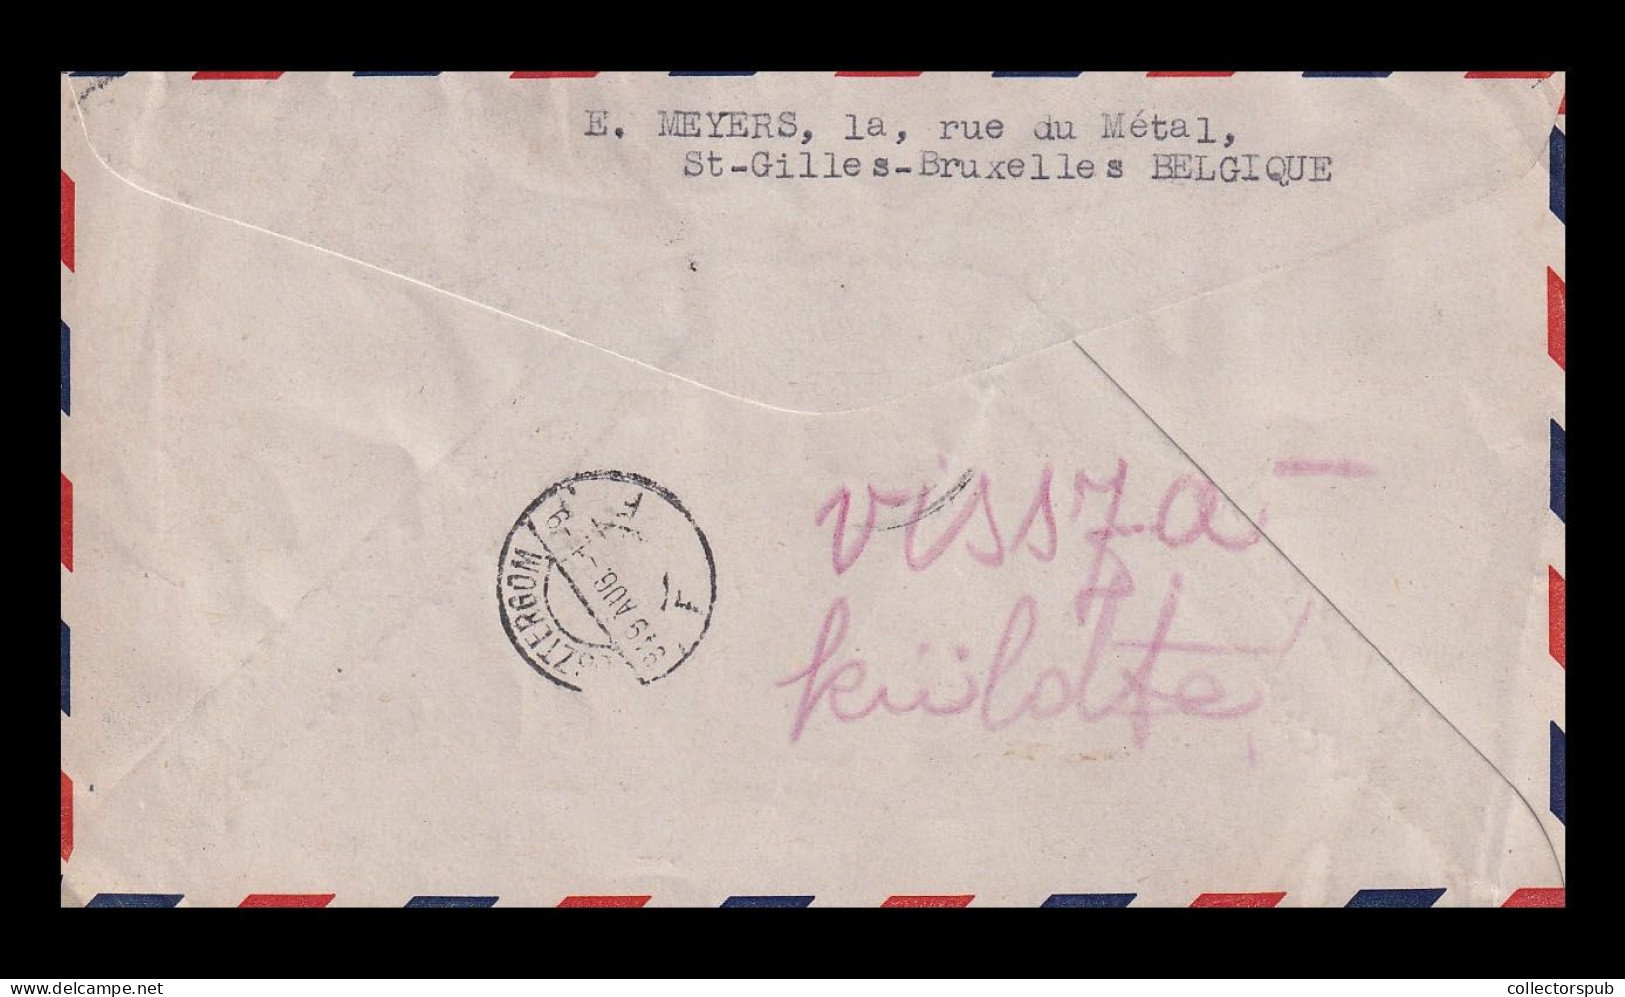 BELGIUM 1949. Nice Airmail Cover To Hungary - Covers & Documents